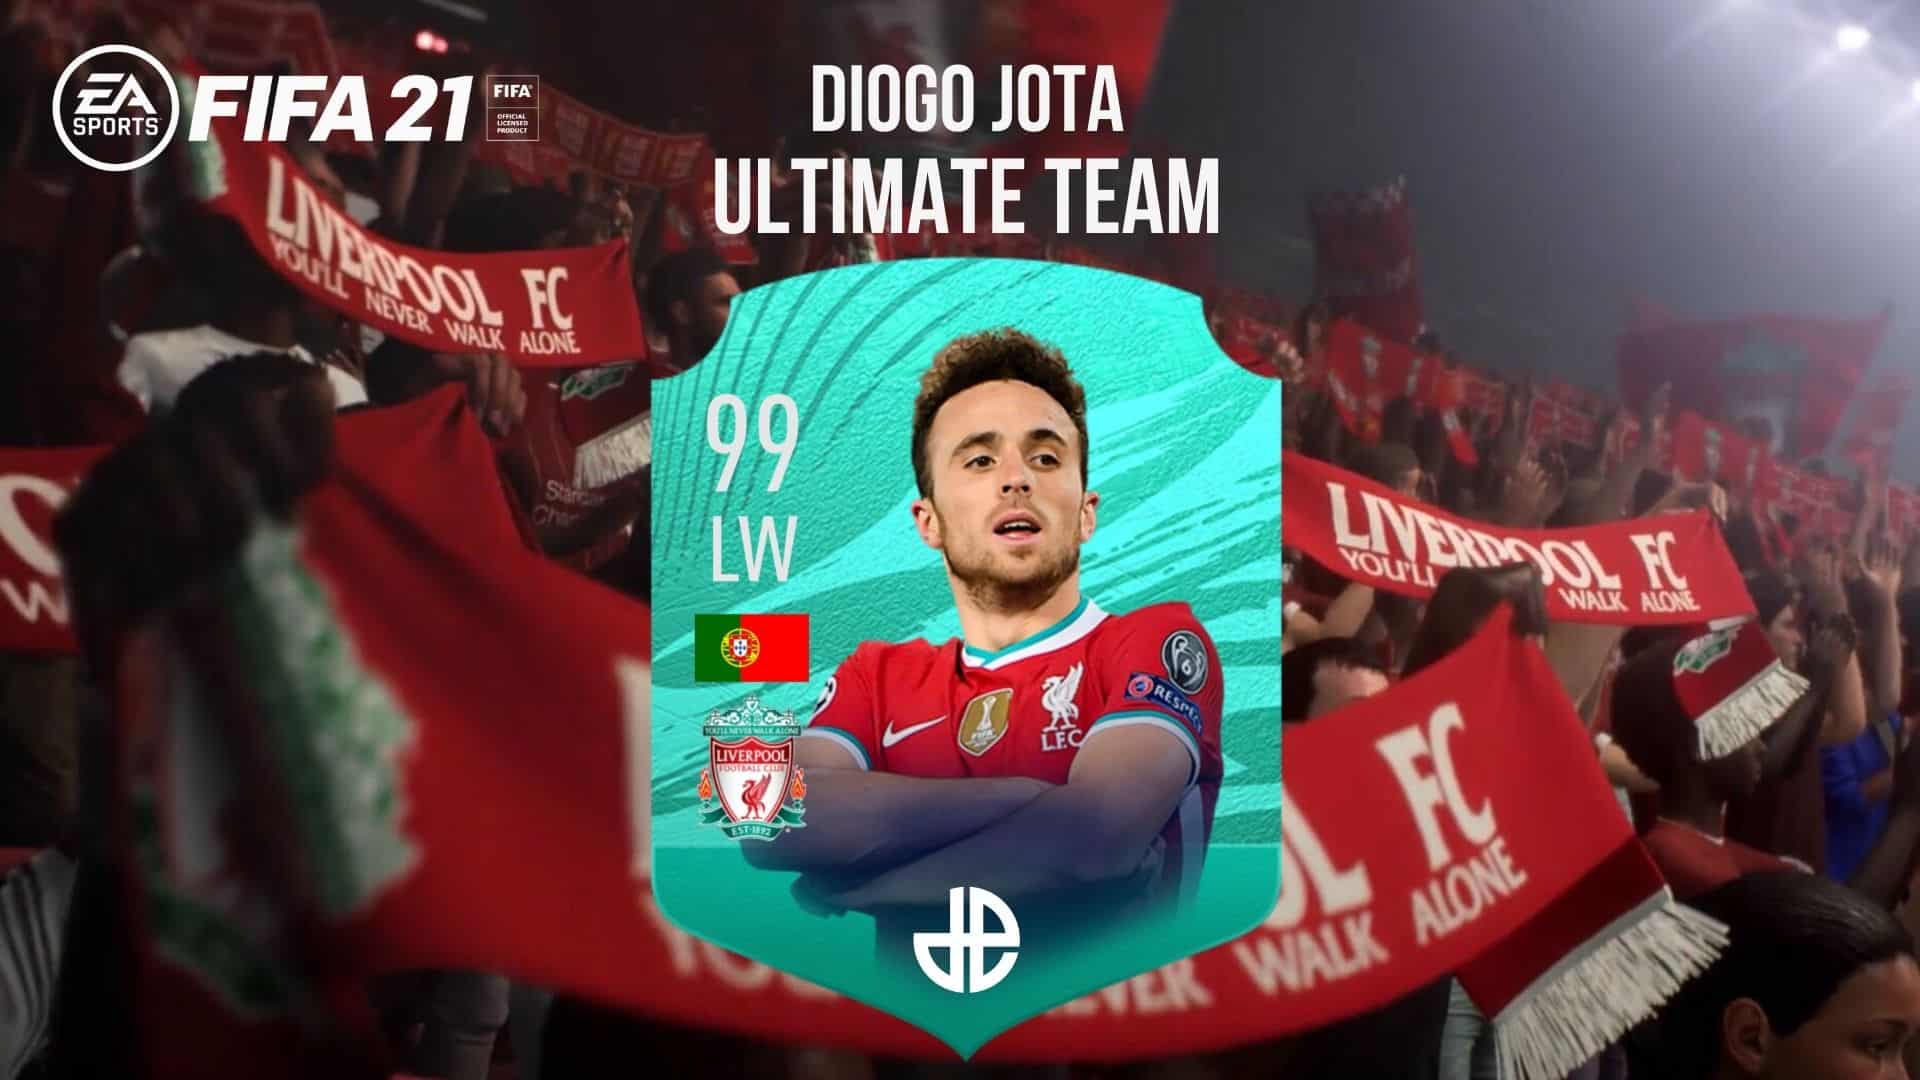 Diogo Jota 99 FIFA 21 card with Liverpool fans